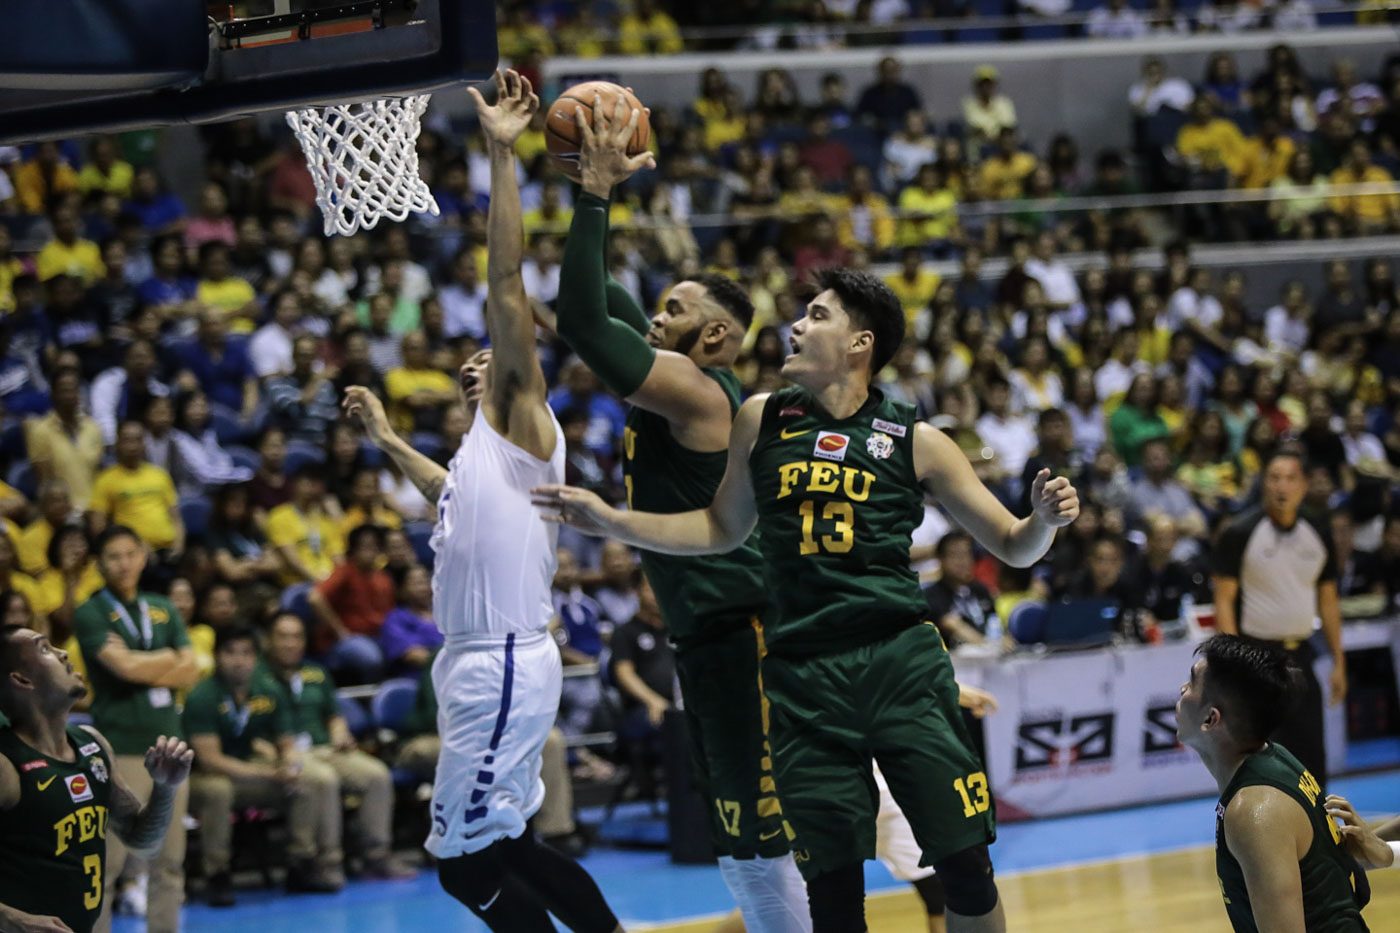 WATCH: FEU looks to complete unfinished UAAP business